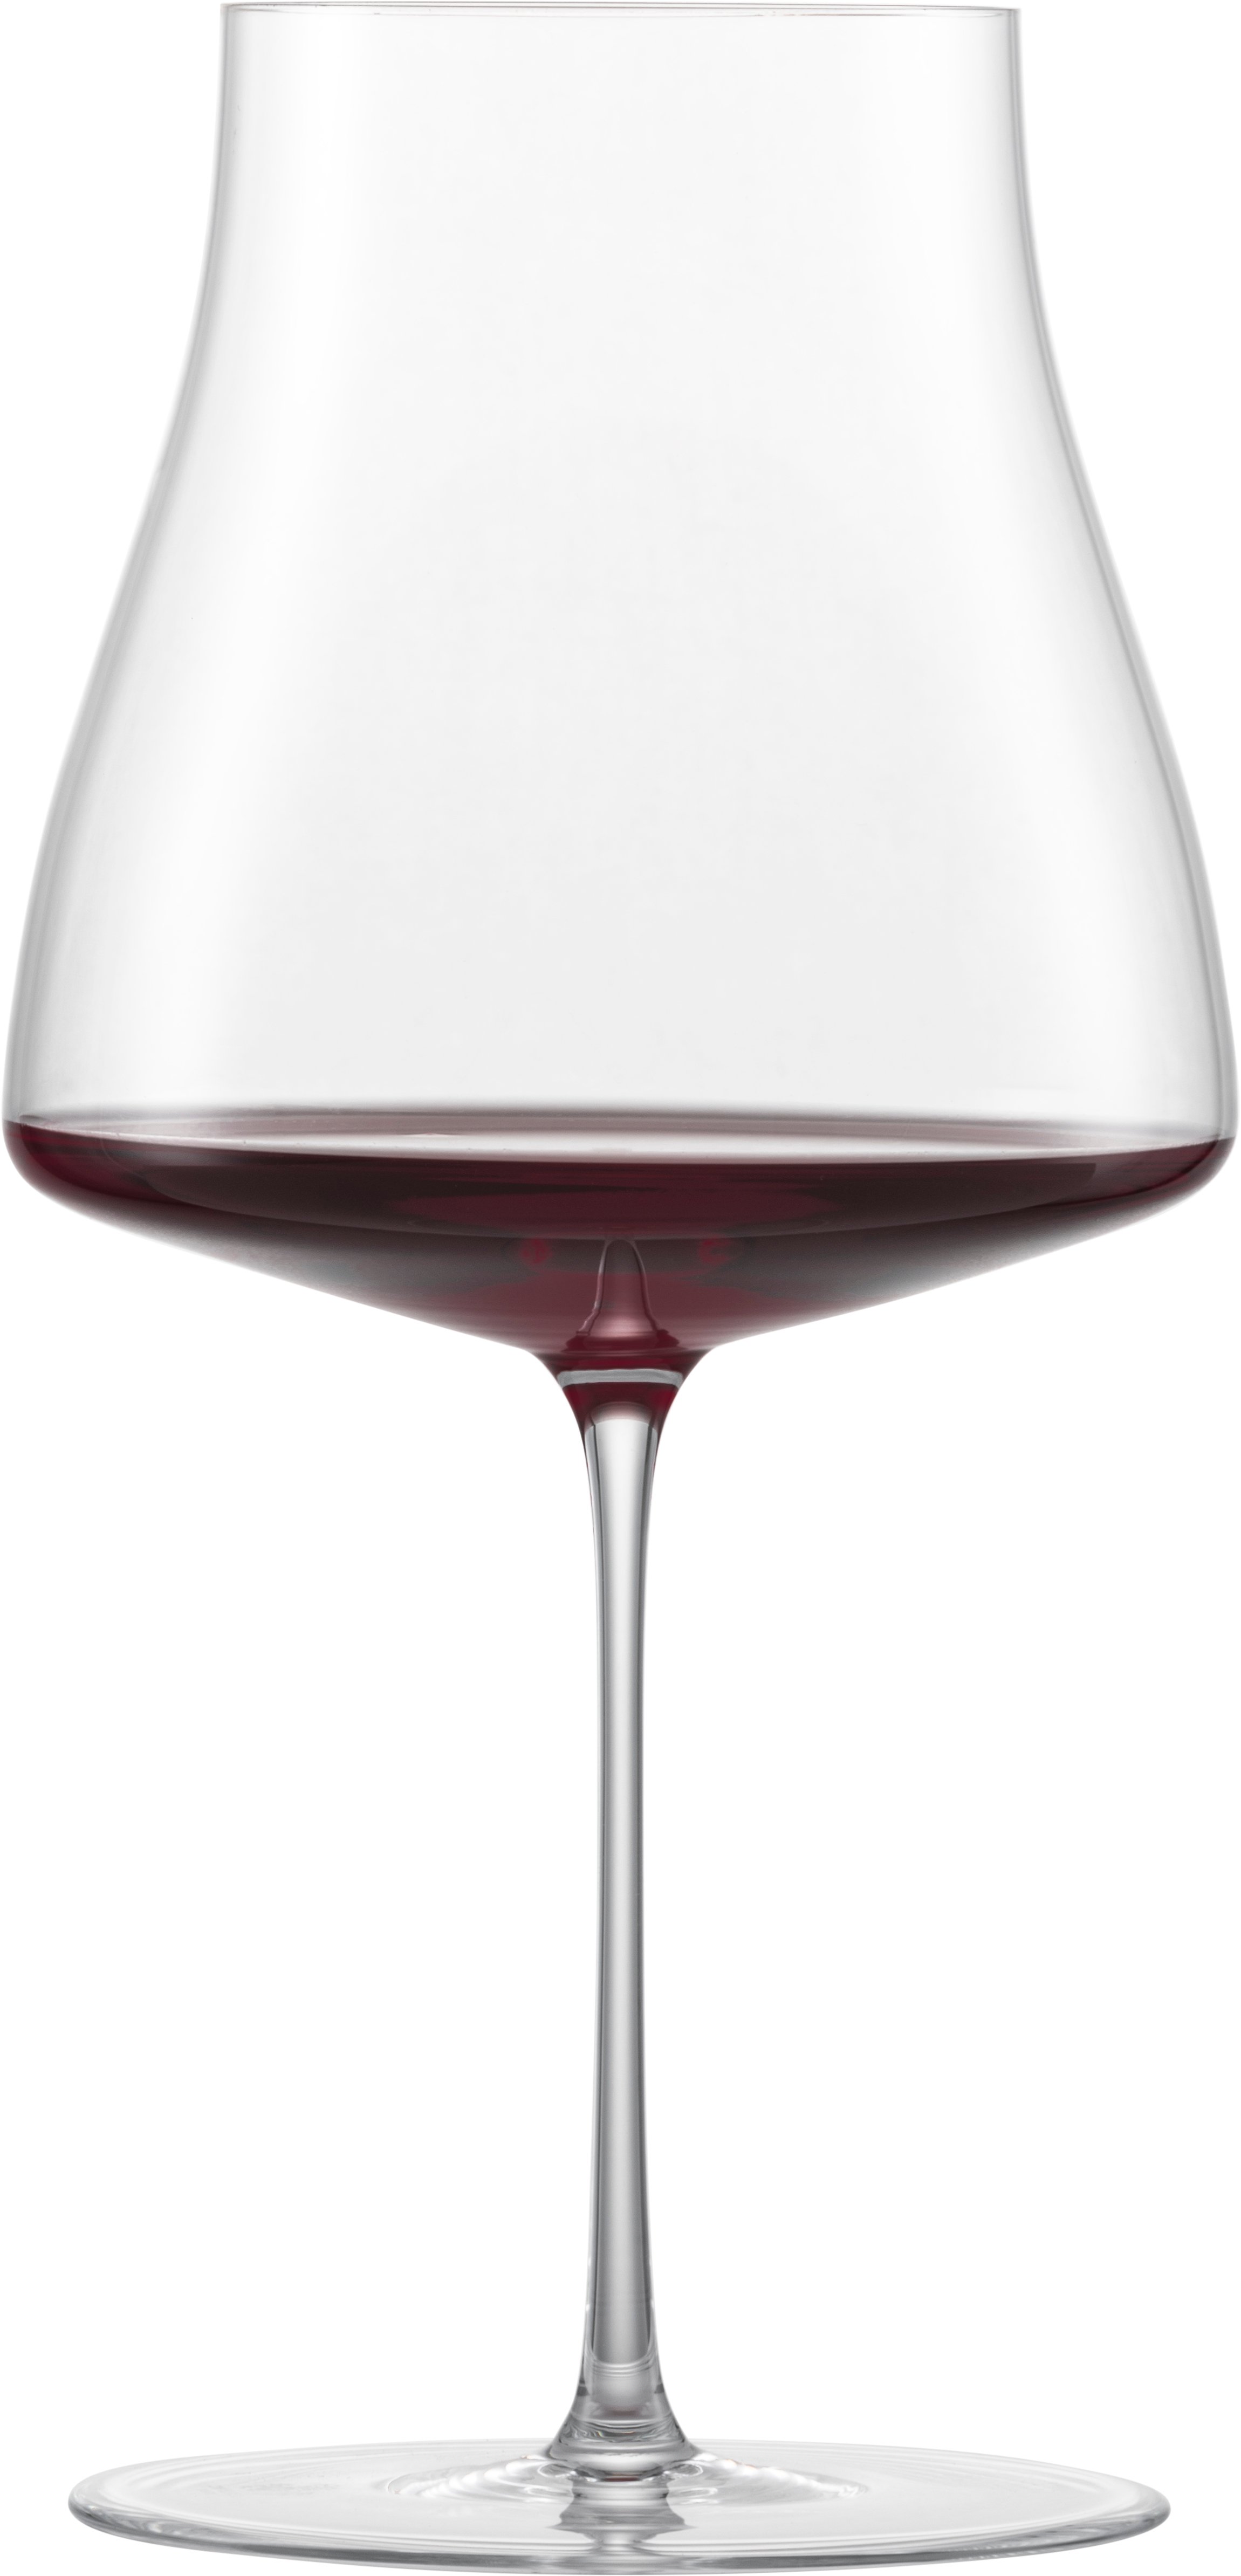 Noir Red wine glass The Moment | ZWIESEL GLAS